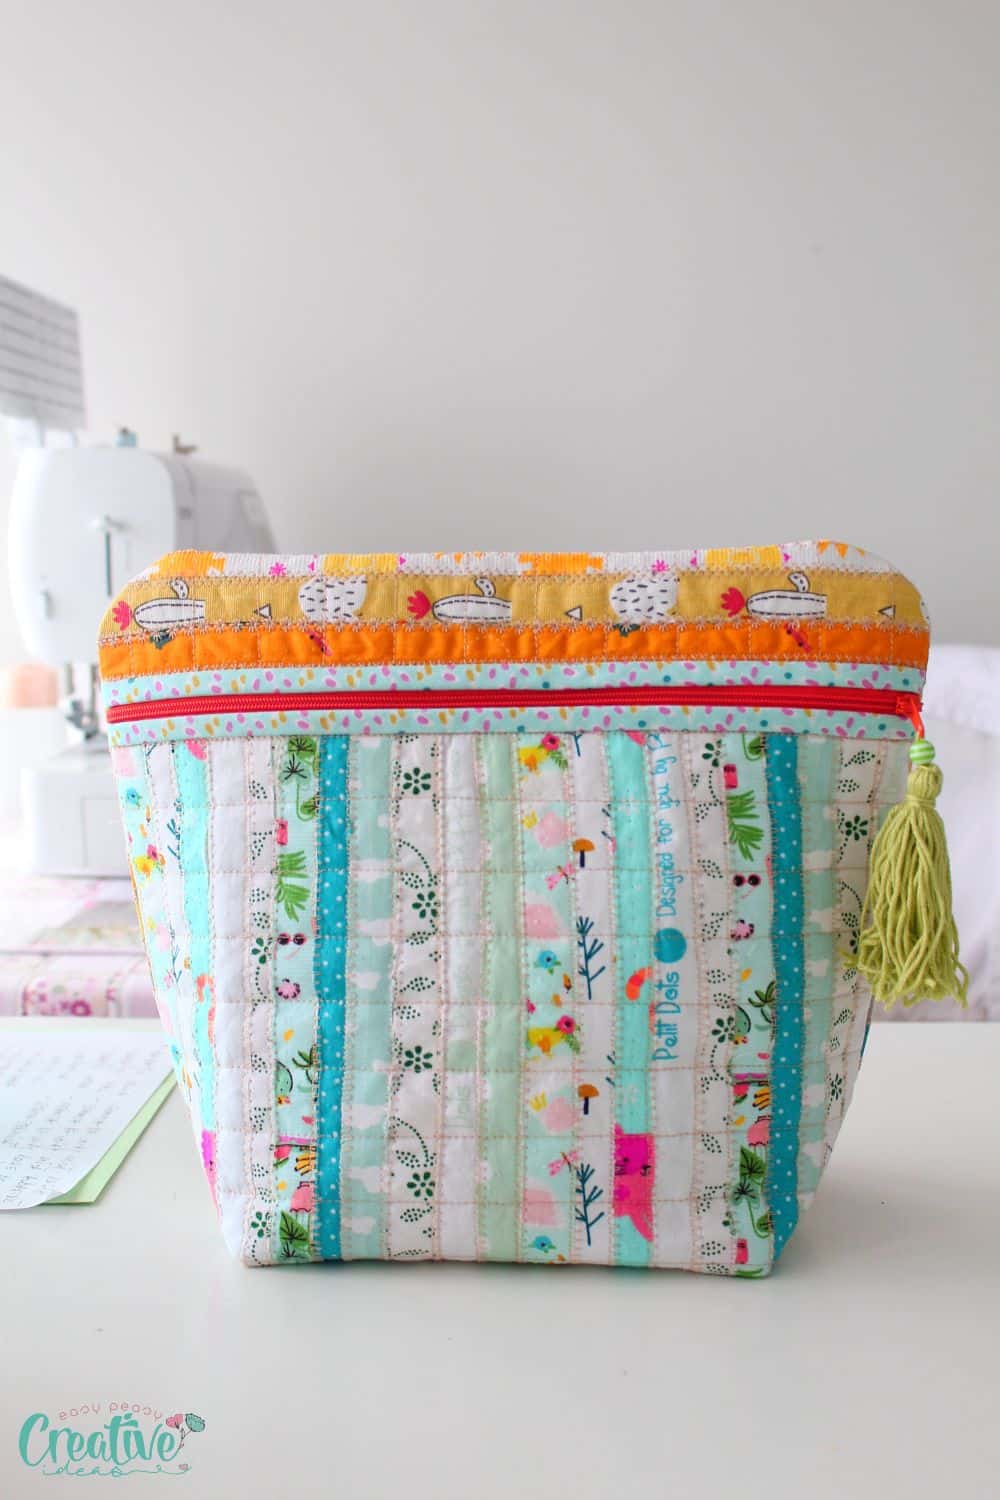 How to sew a toiletry bag